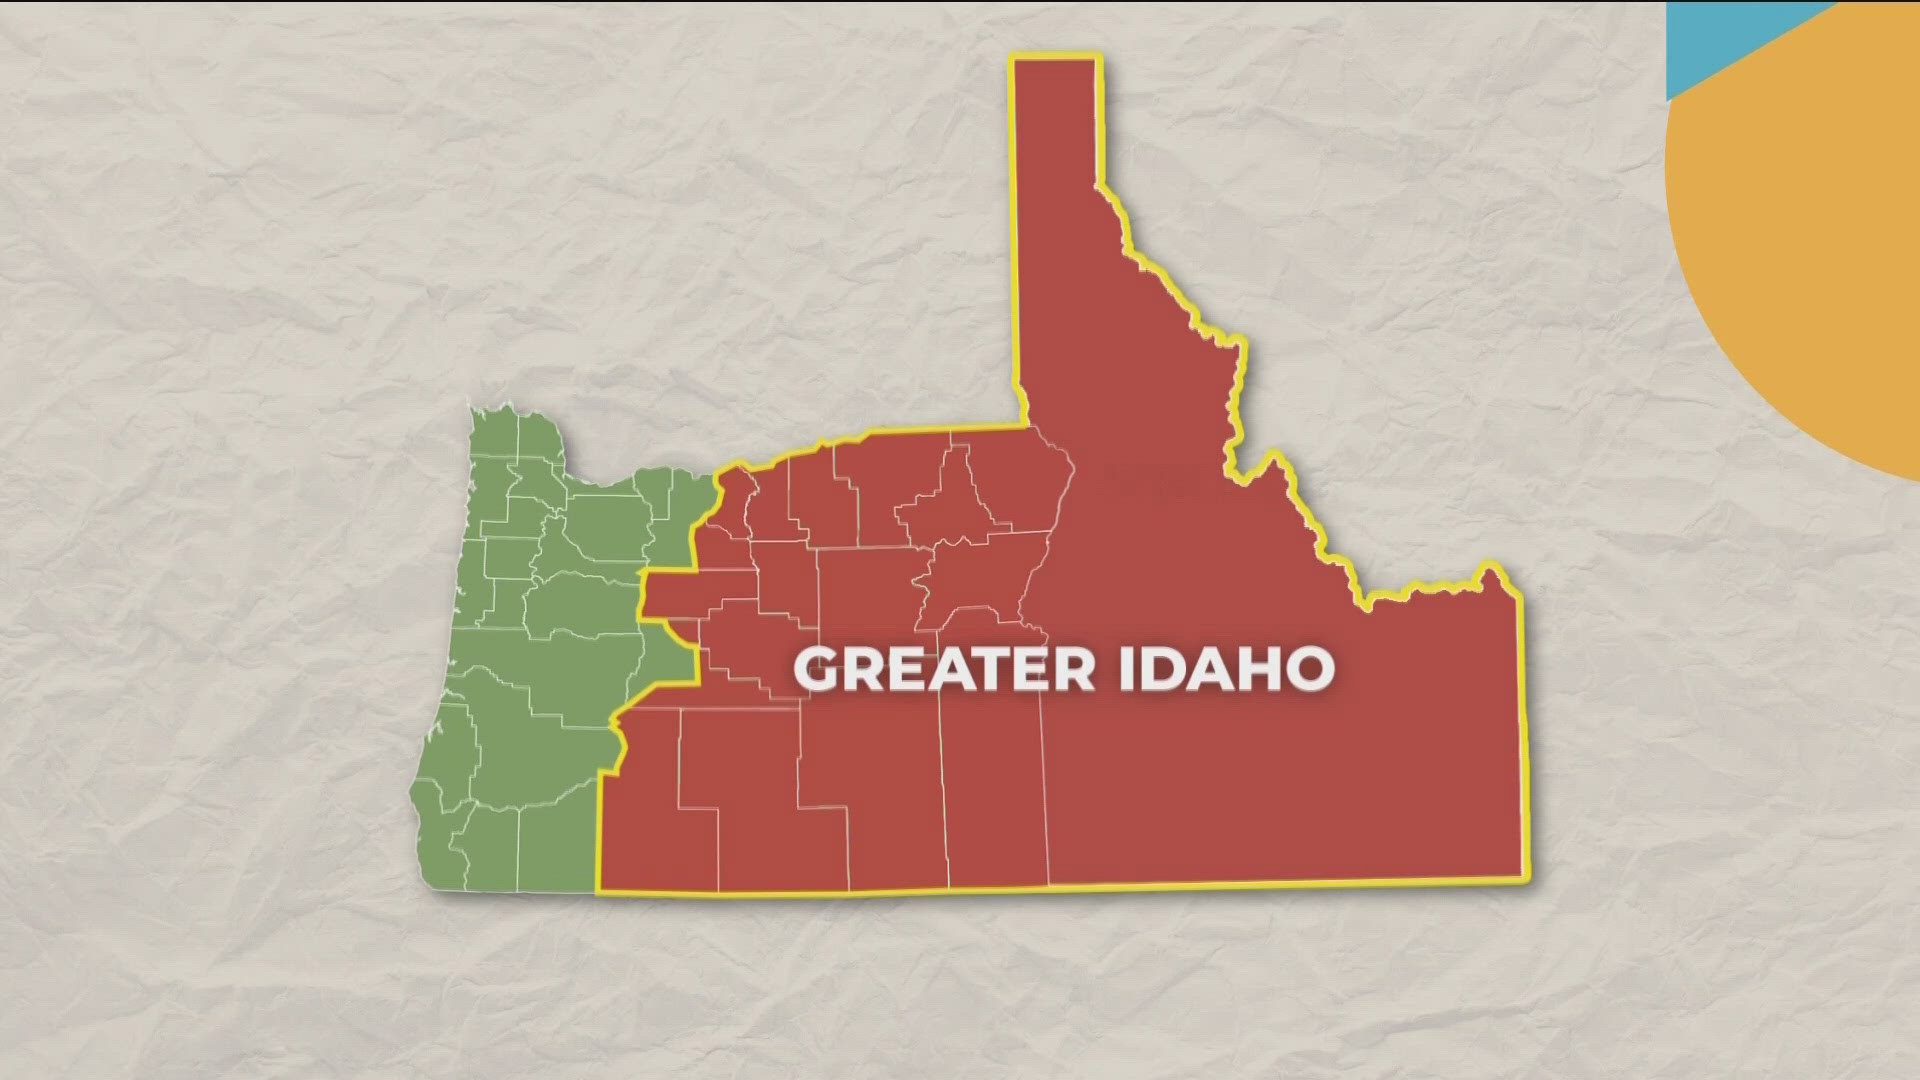 Voters in Crook County approved a measure to support moving the Oregon-Idaho border to incorporate parts of eastern Oregon into the Gem State.